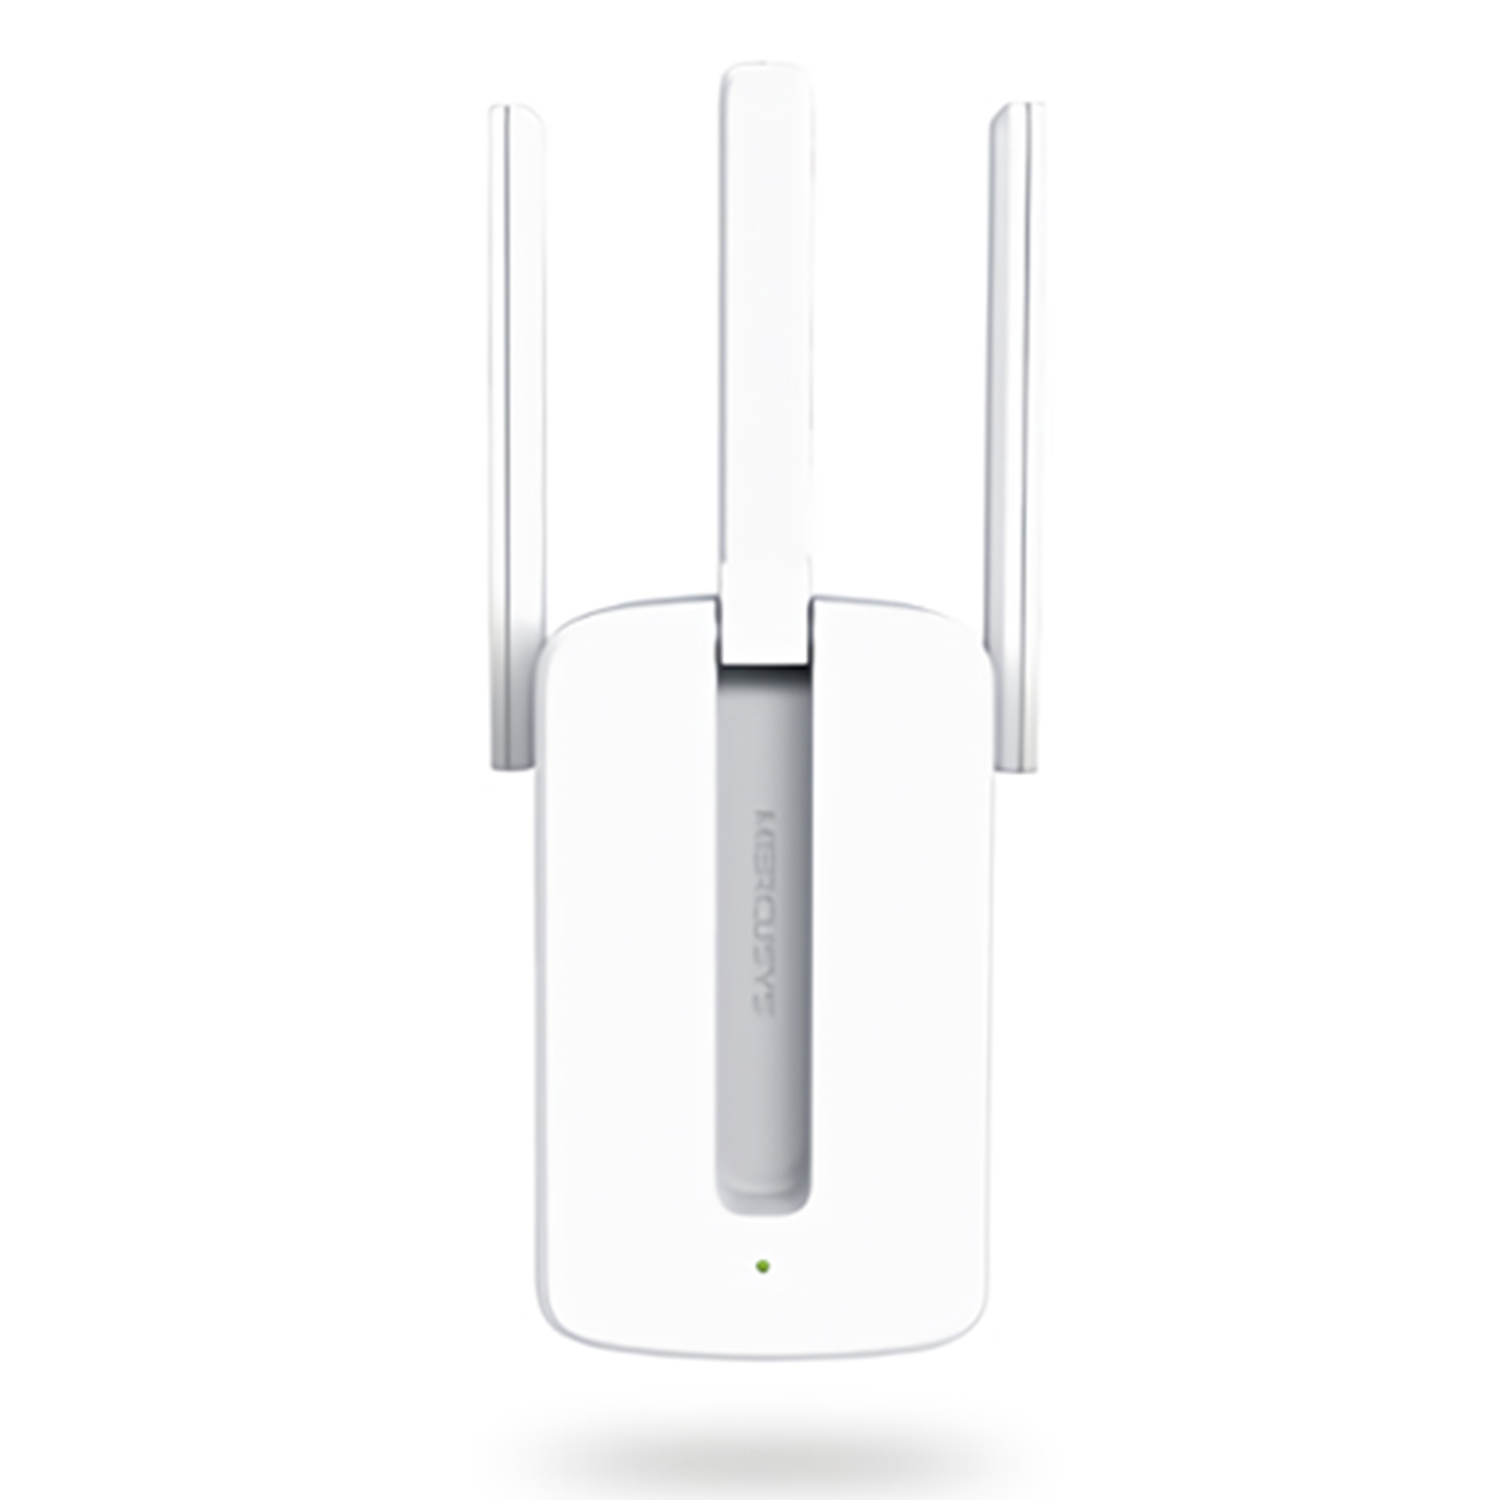 Mercusys MW300RE Wireless Repeater Wi-Fi Booster | MIMO Technology | Three External Antennas | 300Mbps Speed Wi-Fi Range Extender (White)